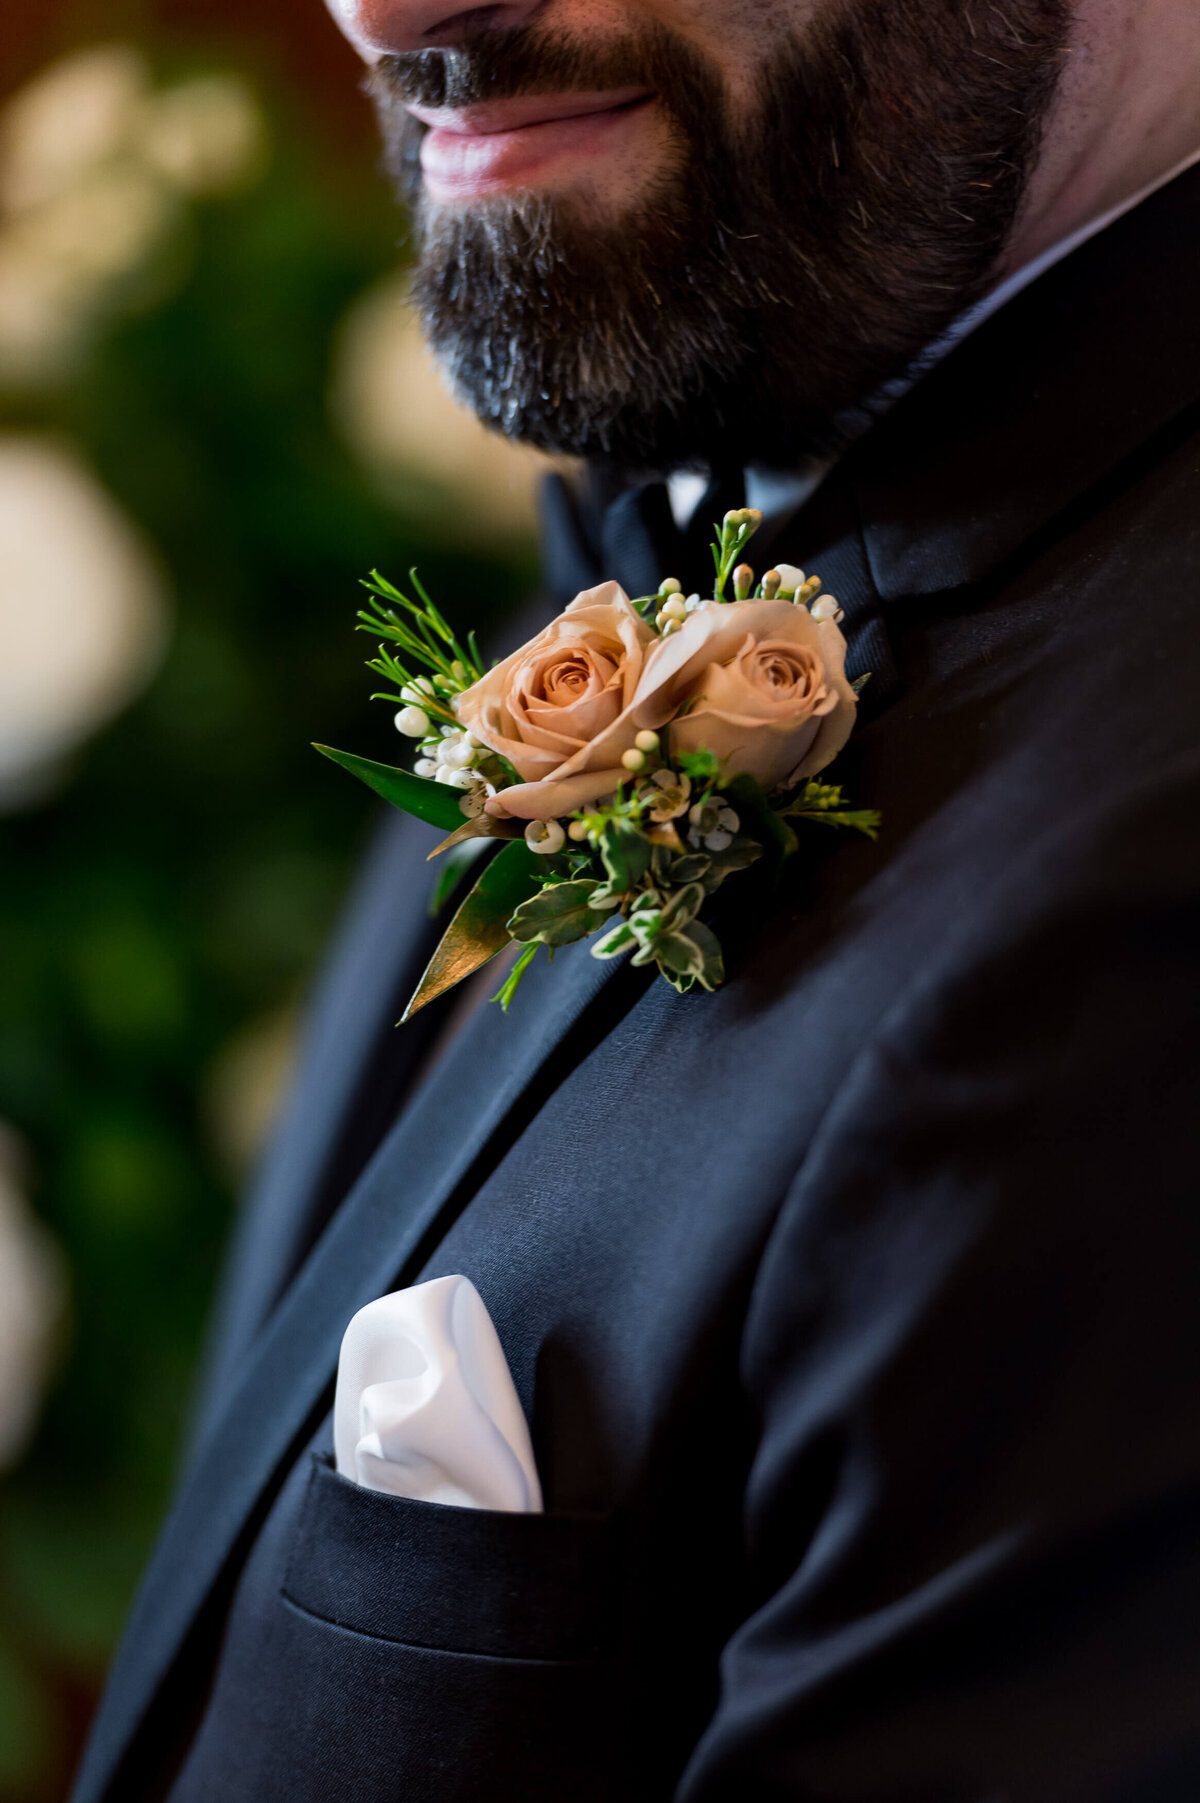 a closeup photo of a blush rose boutonniere on a groom's black tuxedo photographed during an Ottawa wedding at the Chateau Laurier hotel